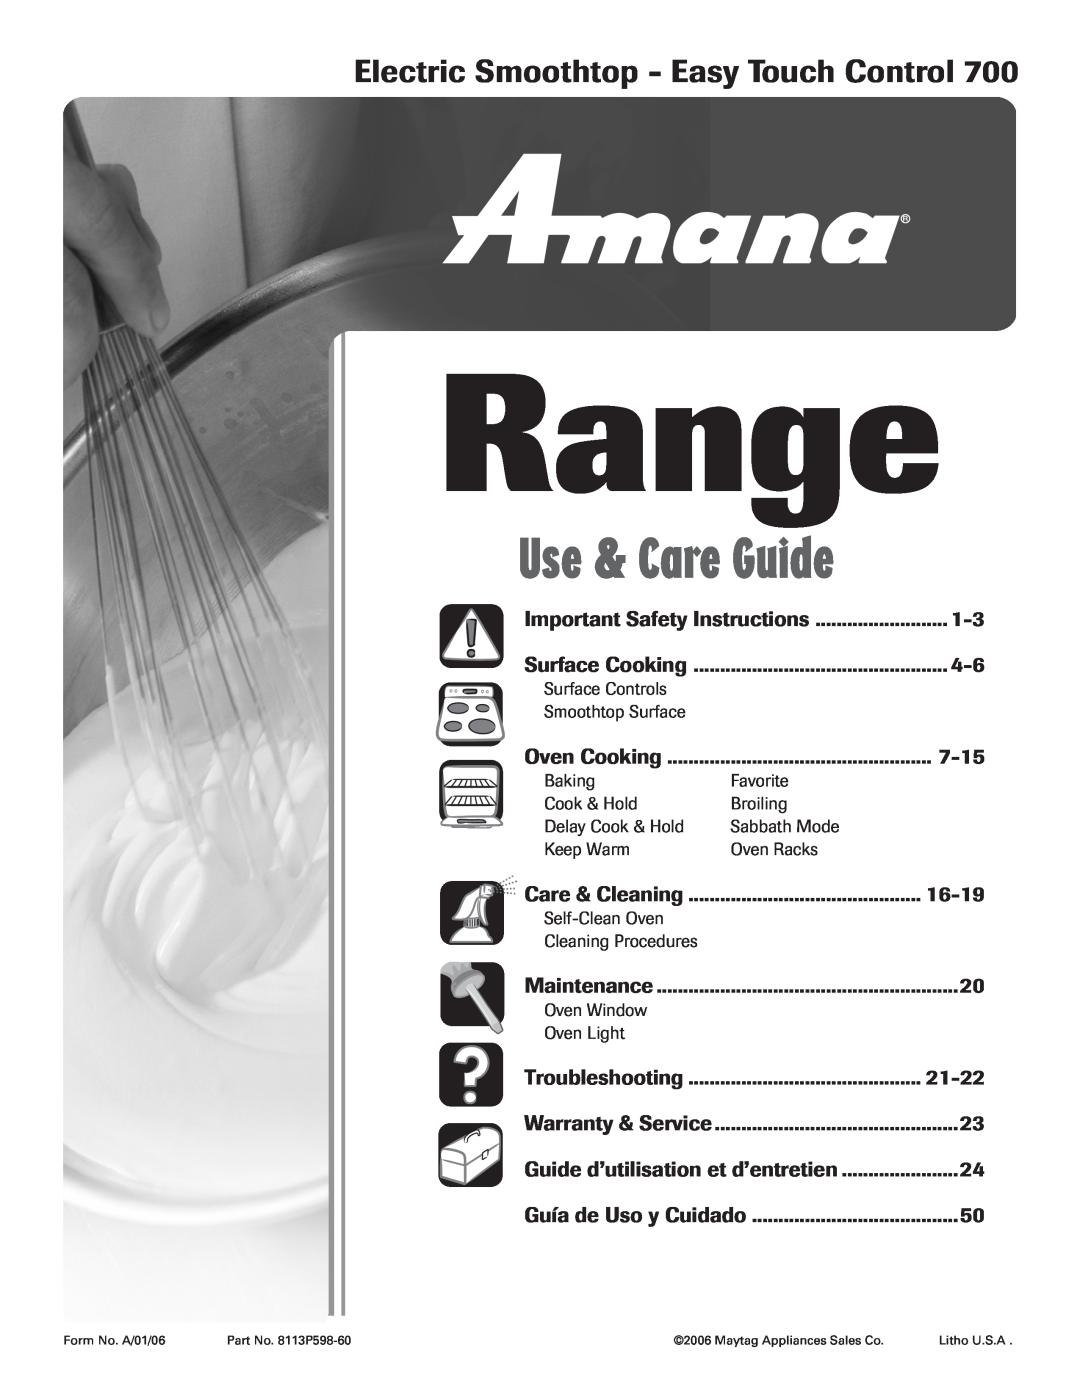 Amana 8113P598-60 manual Range, Electric Smoothtop - Easy Touch Control, Important Safety Instructions, Oven Cooking, 7-15 